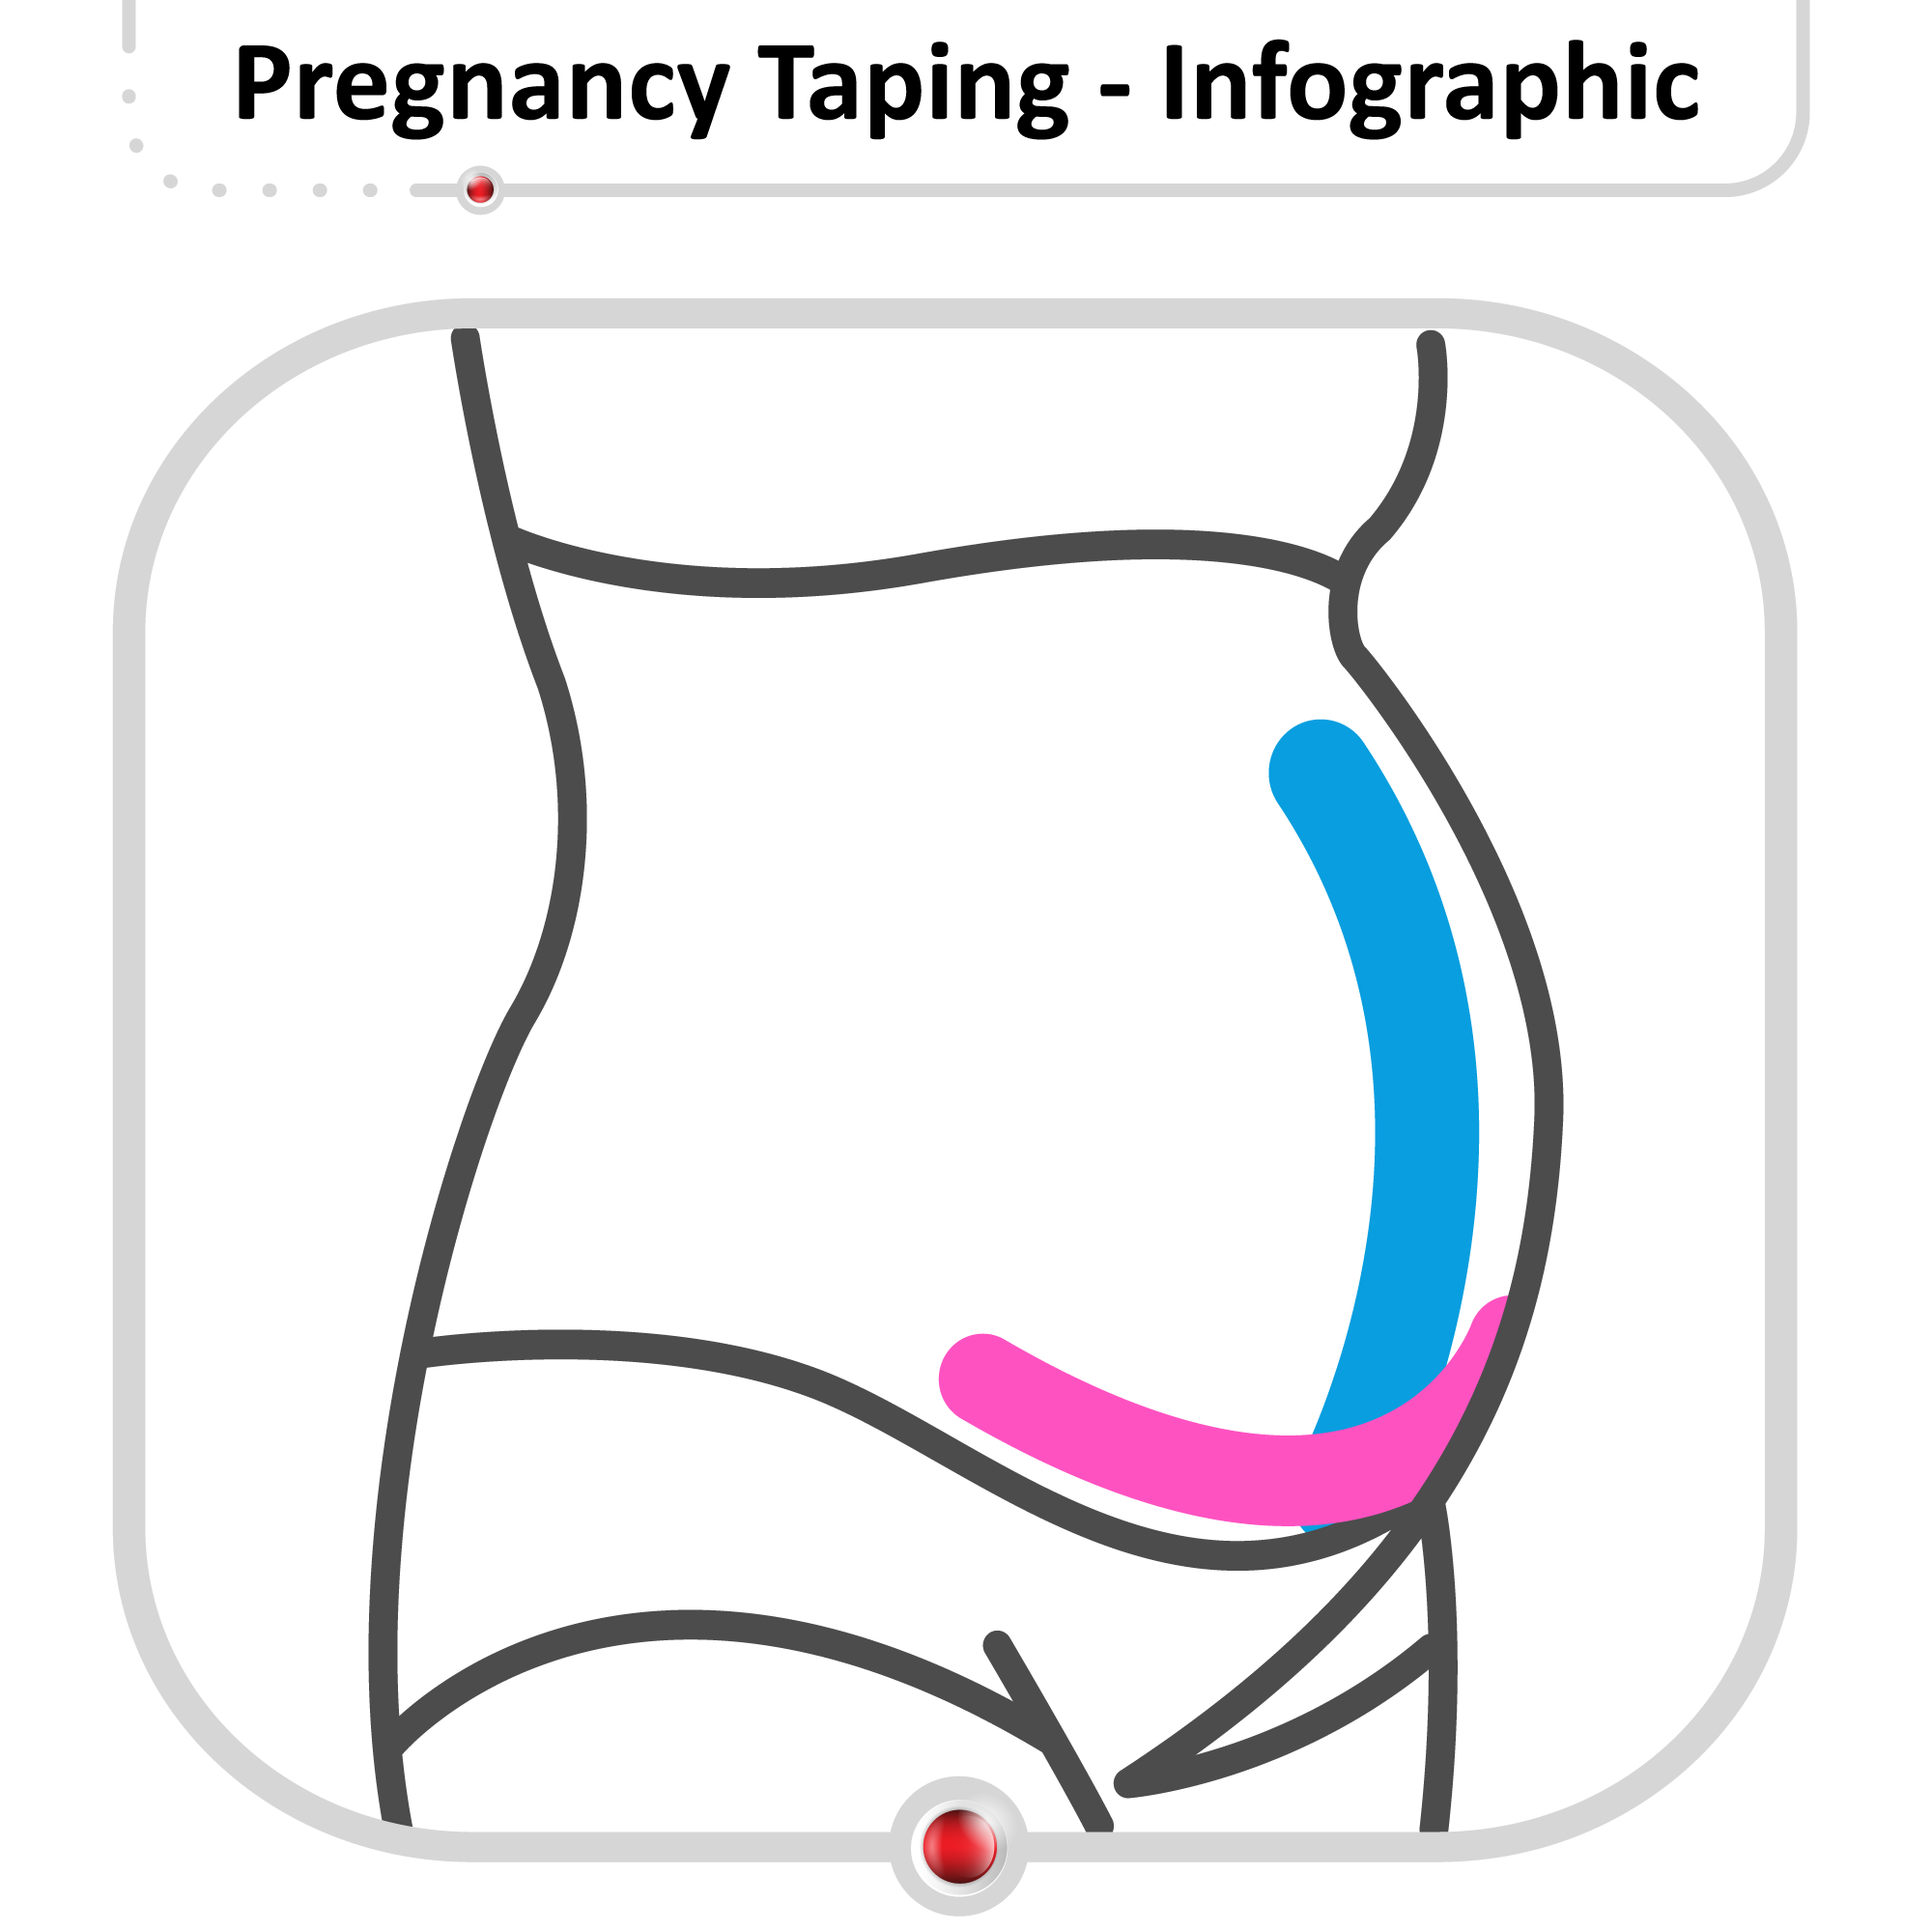 Need some belly support during pregnancy, try kinesiology tape! Mine i, pregnancy